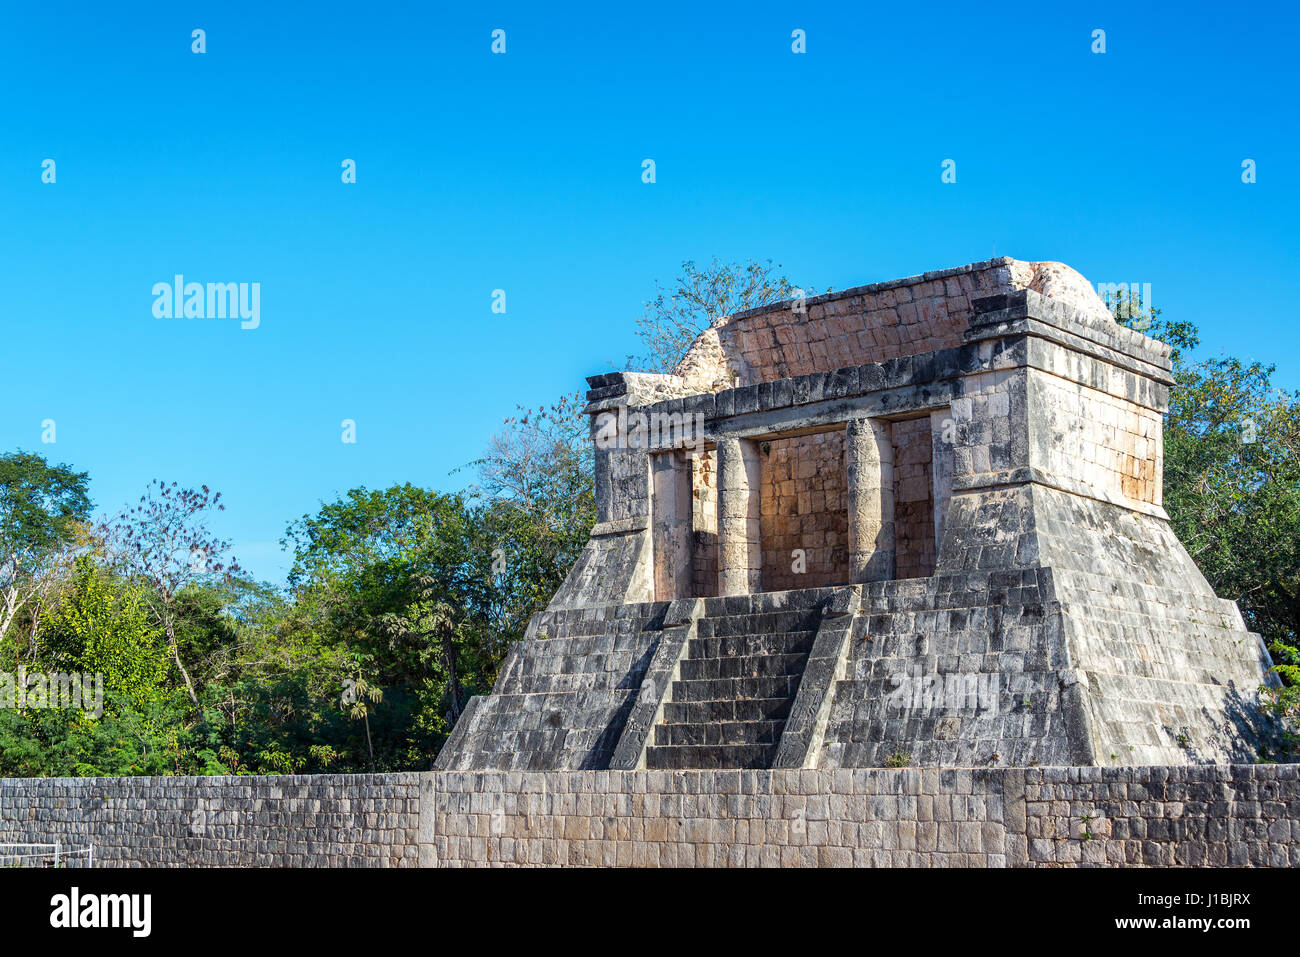 View of the temple of the bearded man in the Mayan ruins of Chichen Itza in Mexico Stock Photo